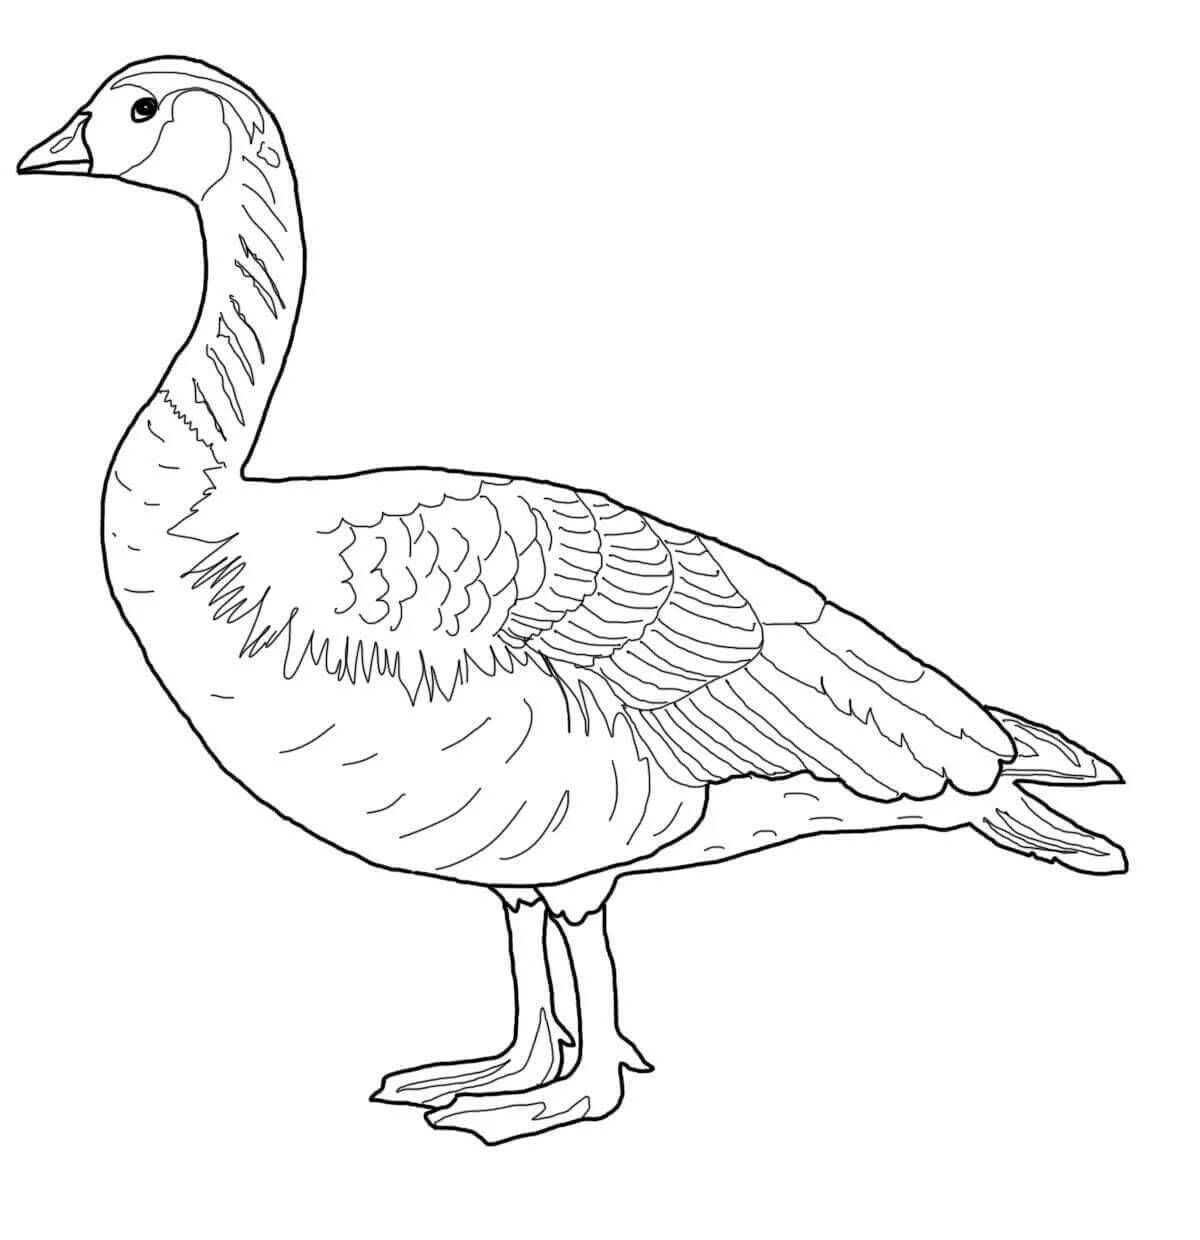 Creative goose coloring for kids